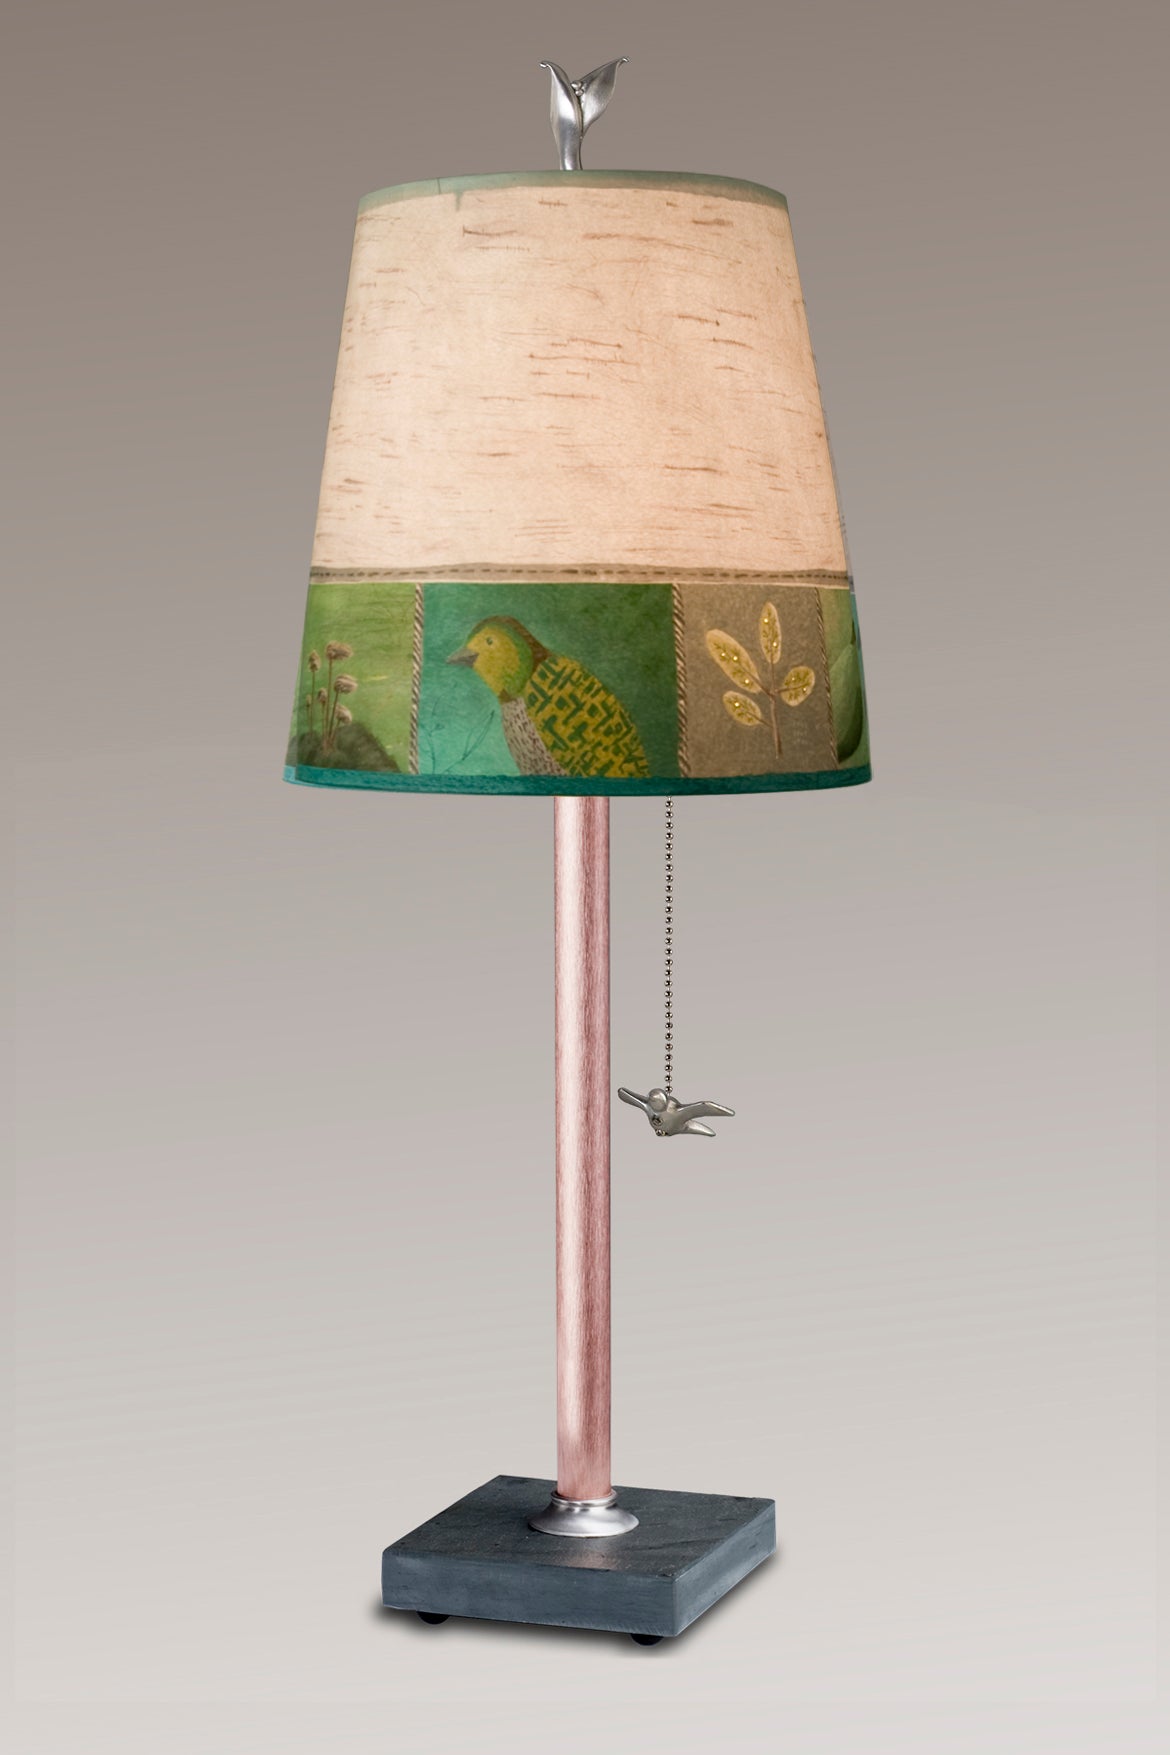 Janna Ugone & Co Table Lamps Copper Table Lamp with Small Drum in Woodland Trails in Birch